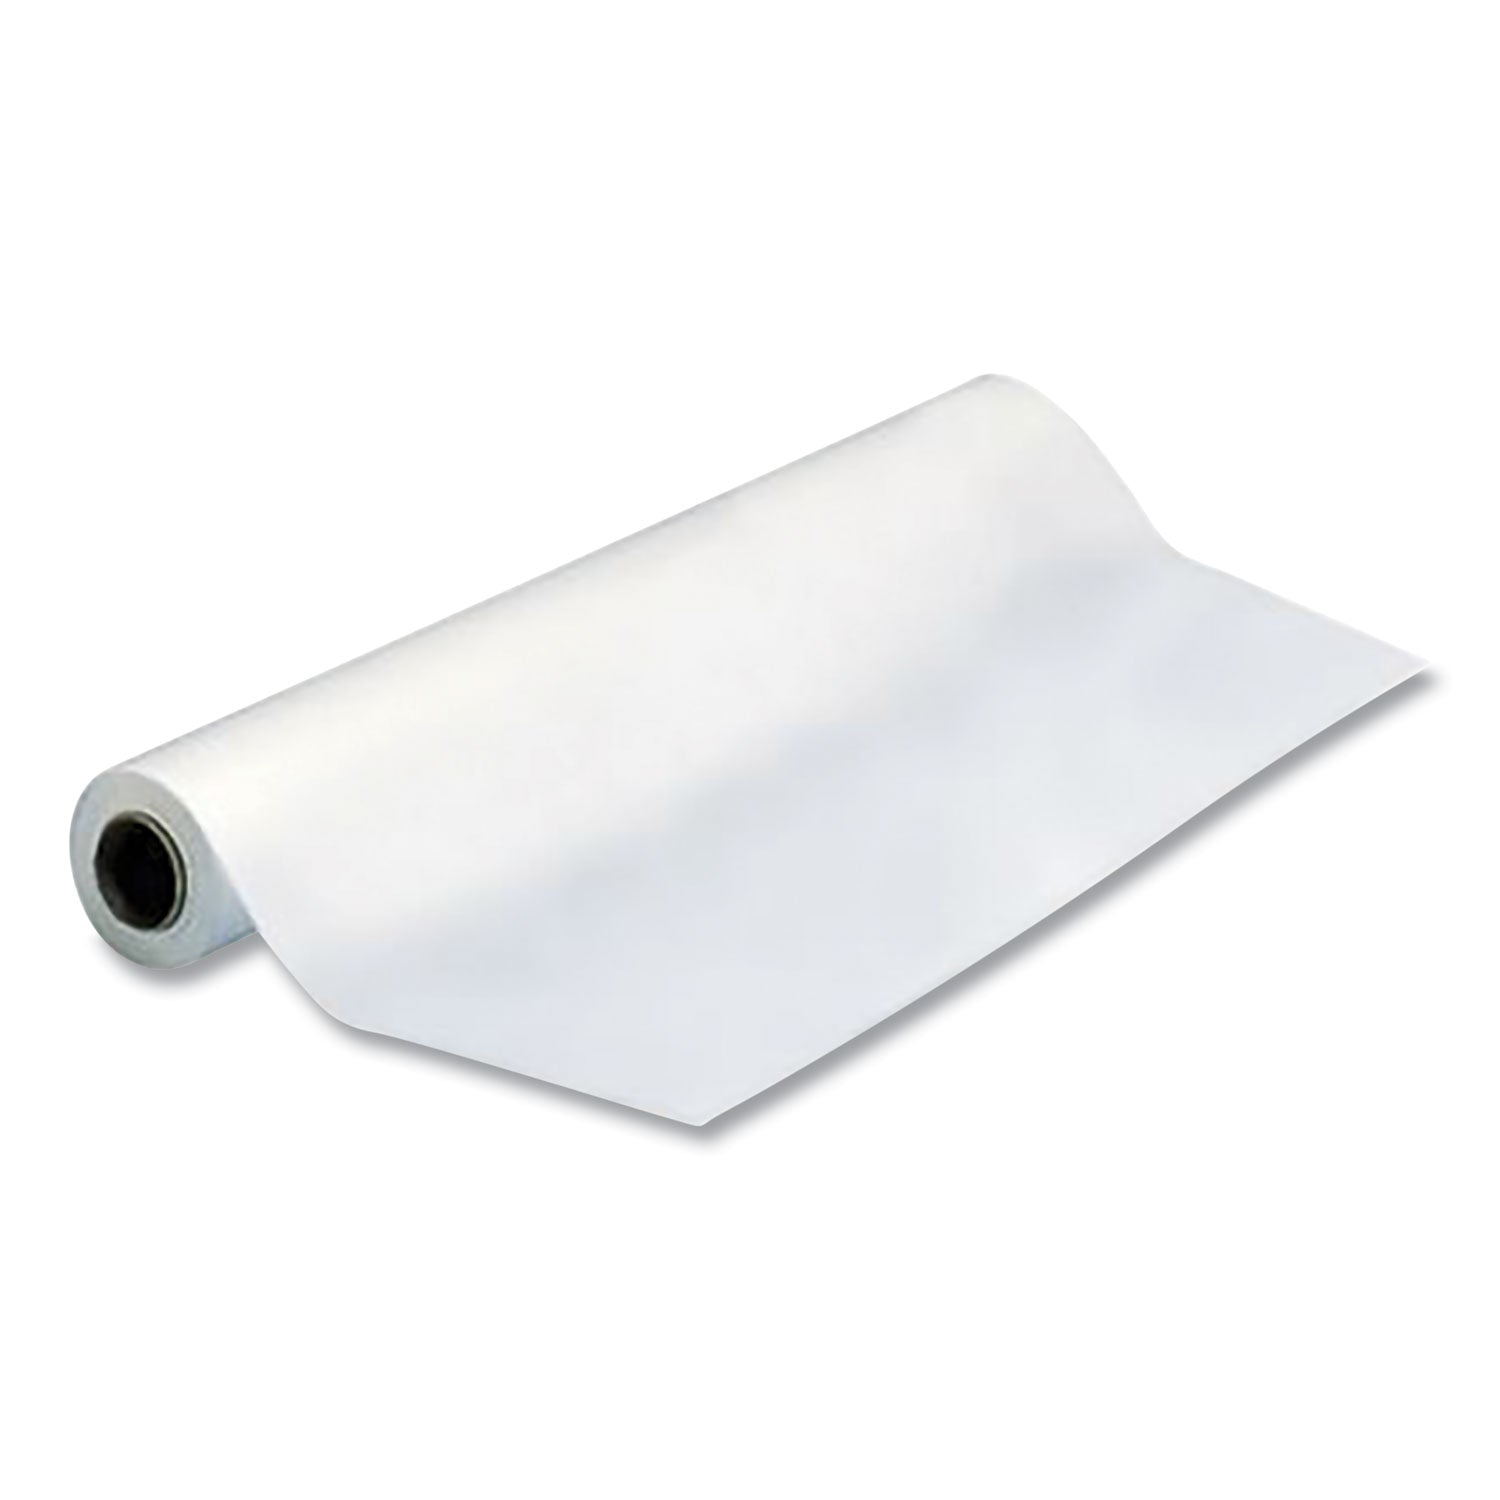 choice-exam-table-paper-roll-crepe-texture-21-x-125-ft-white-12-carton_bhc32163 - 1